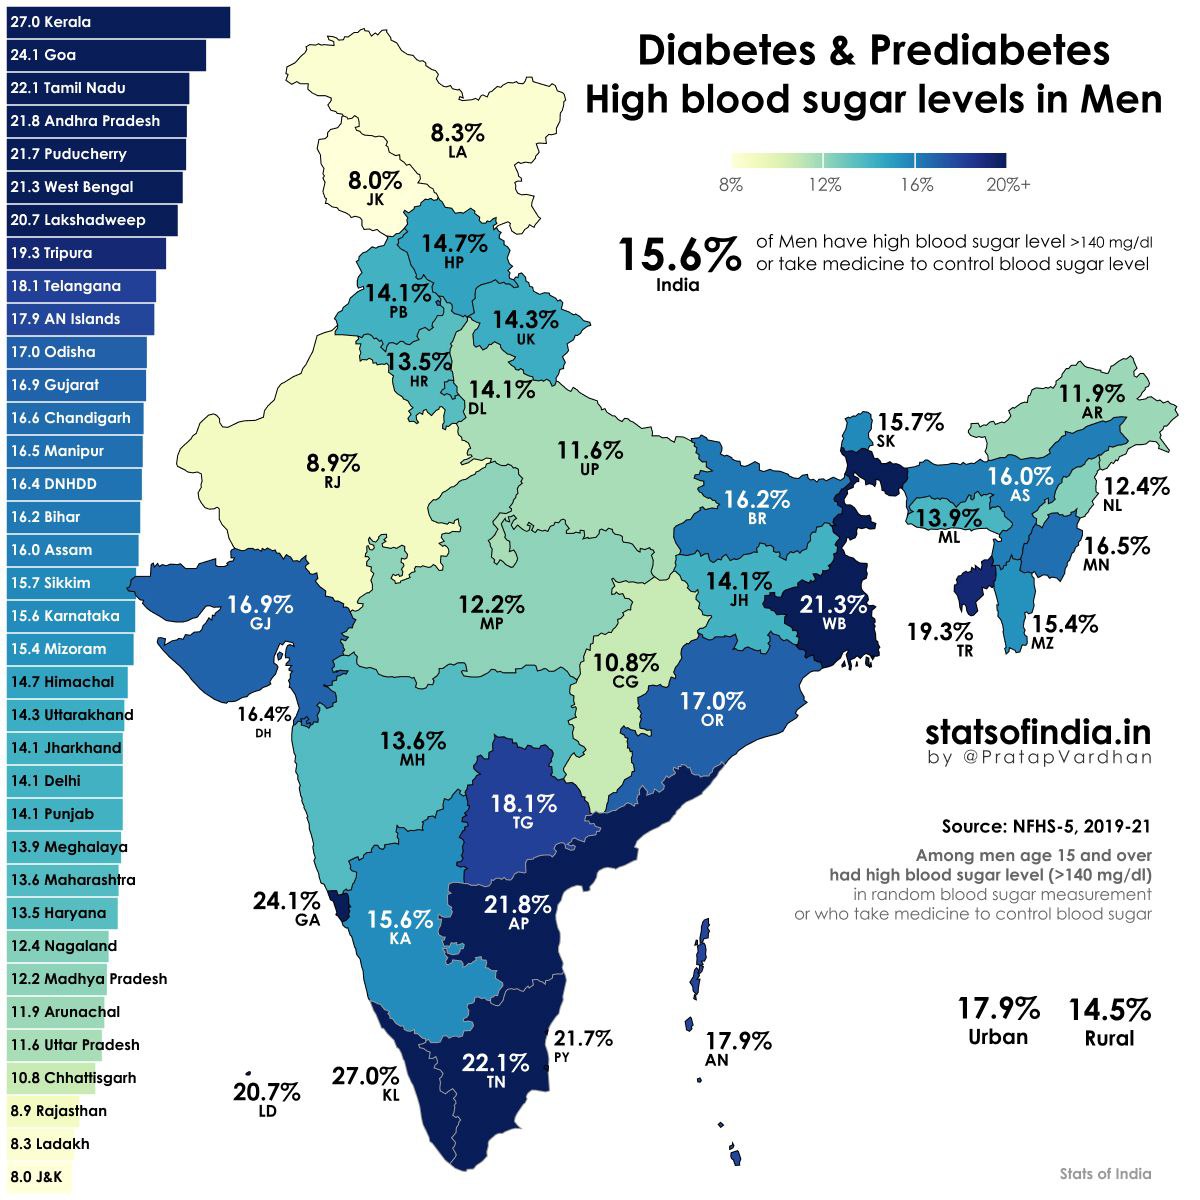 India logged 31 million new diabetes patients in 2019-21